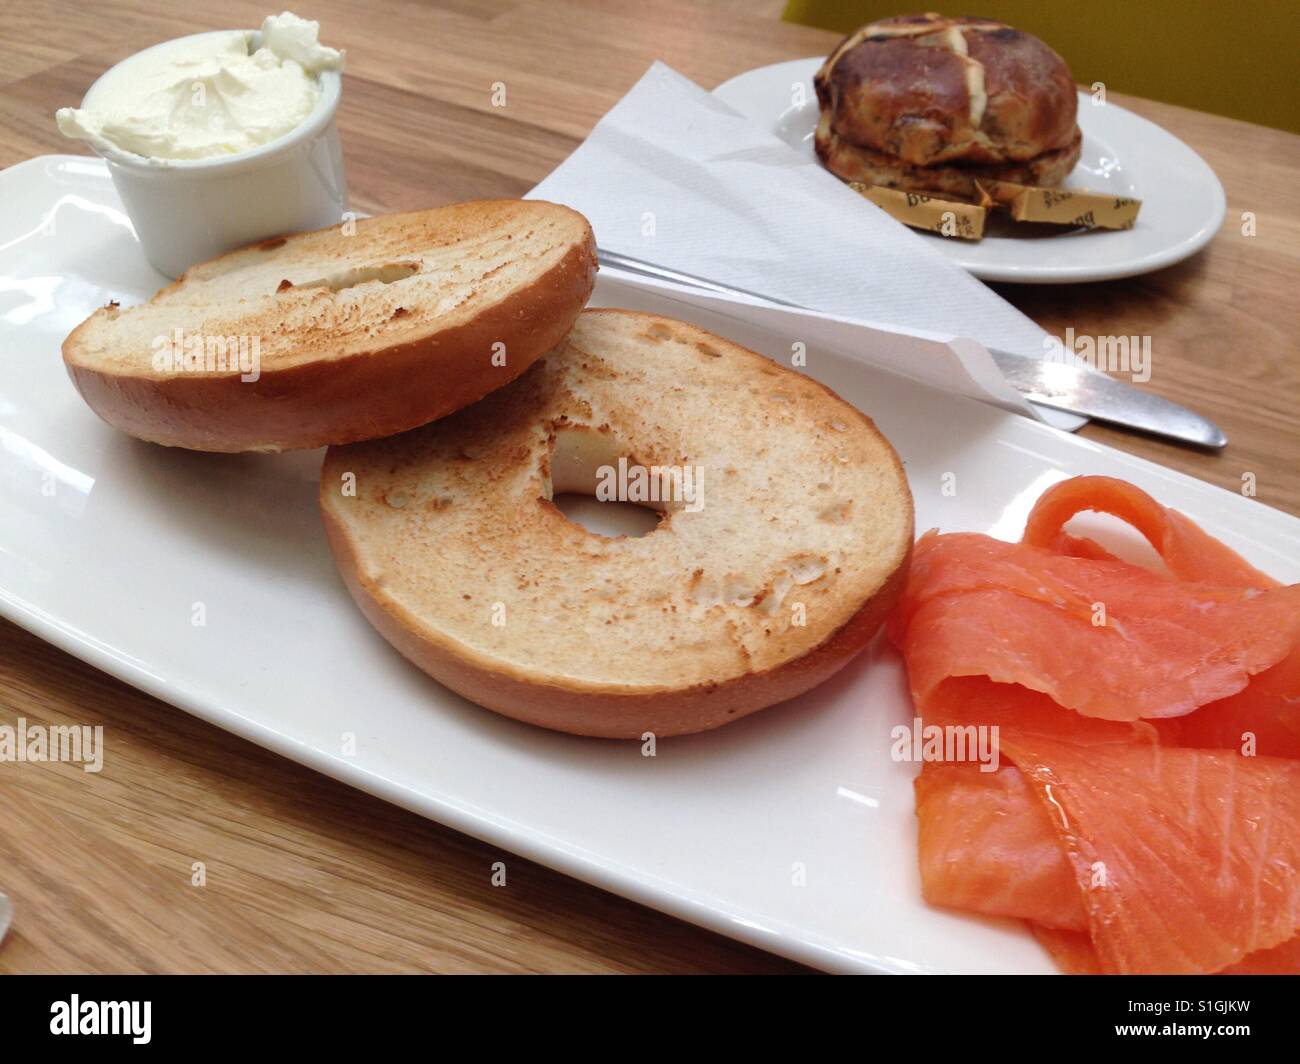 Toasted bagel served with cream cheese and smoked salmon. Stock Photo